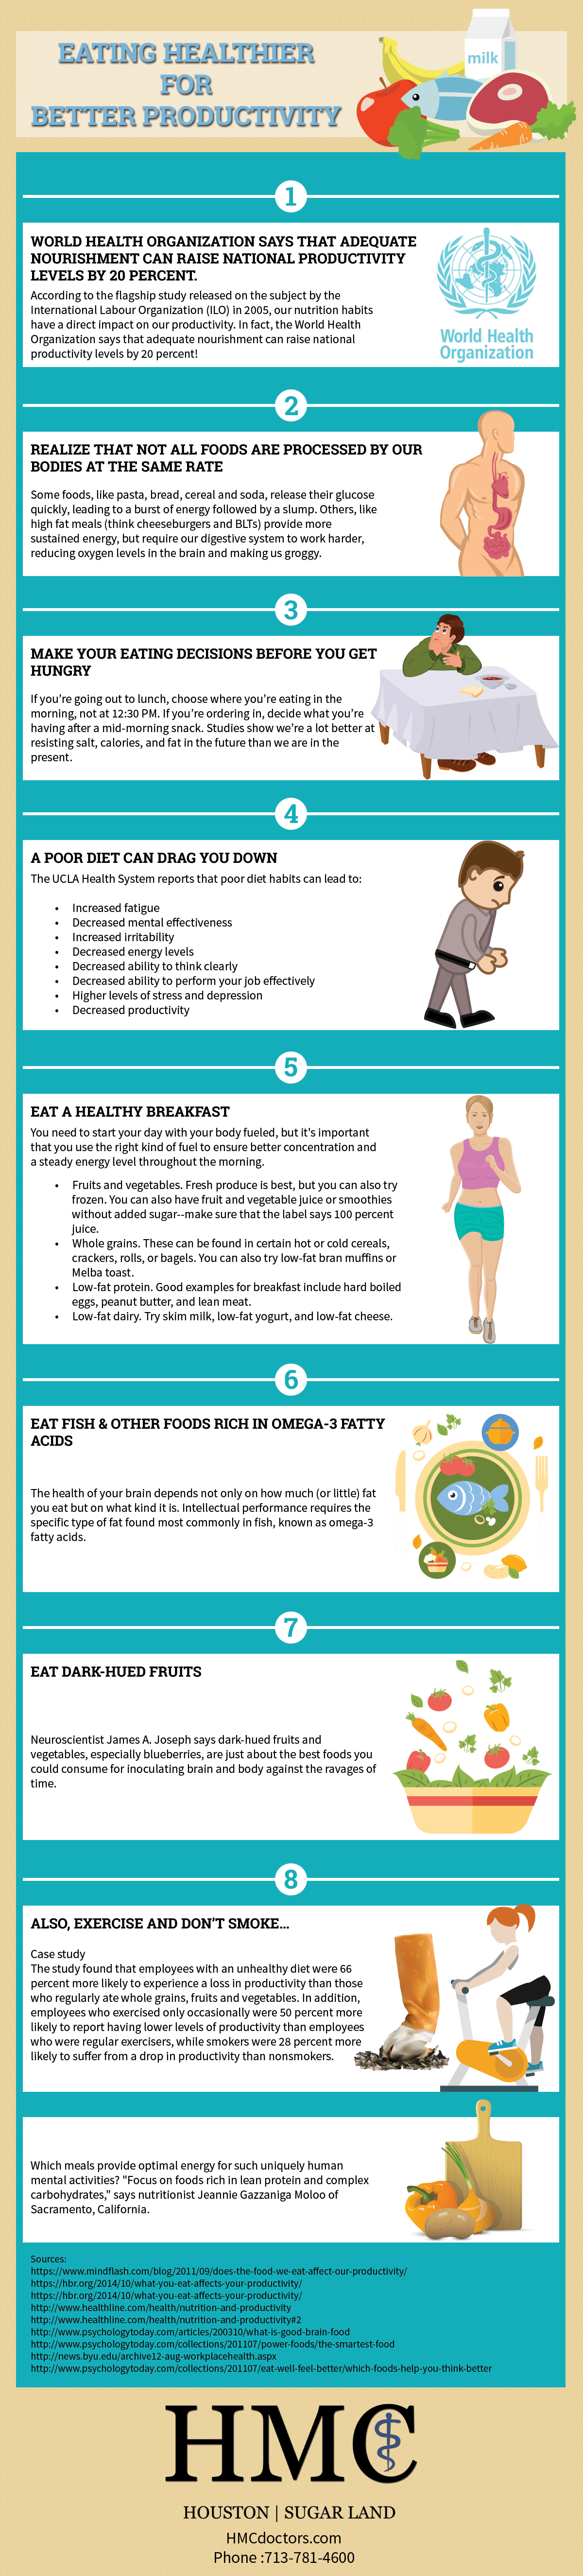 Eating Healthier for Better Productivity Infographic | HMC